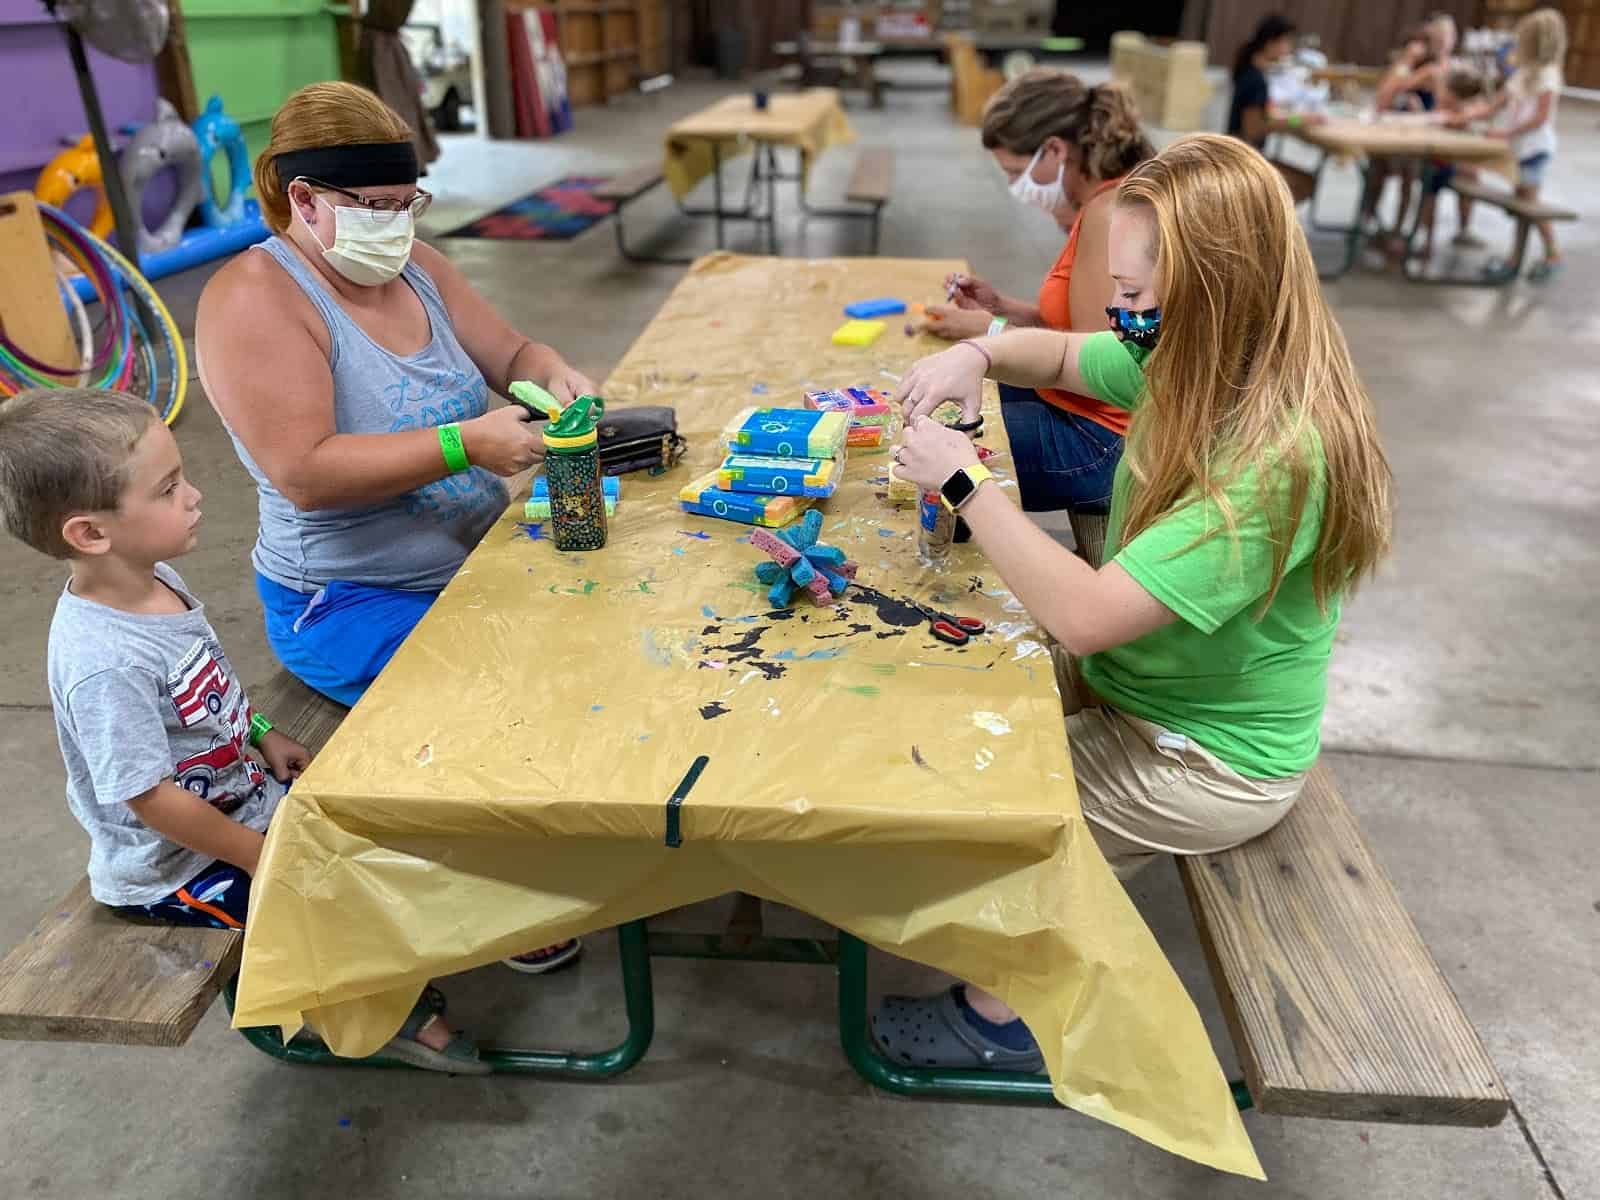 A group of people sitting at a table making crafts.